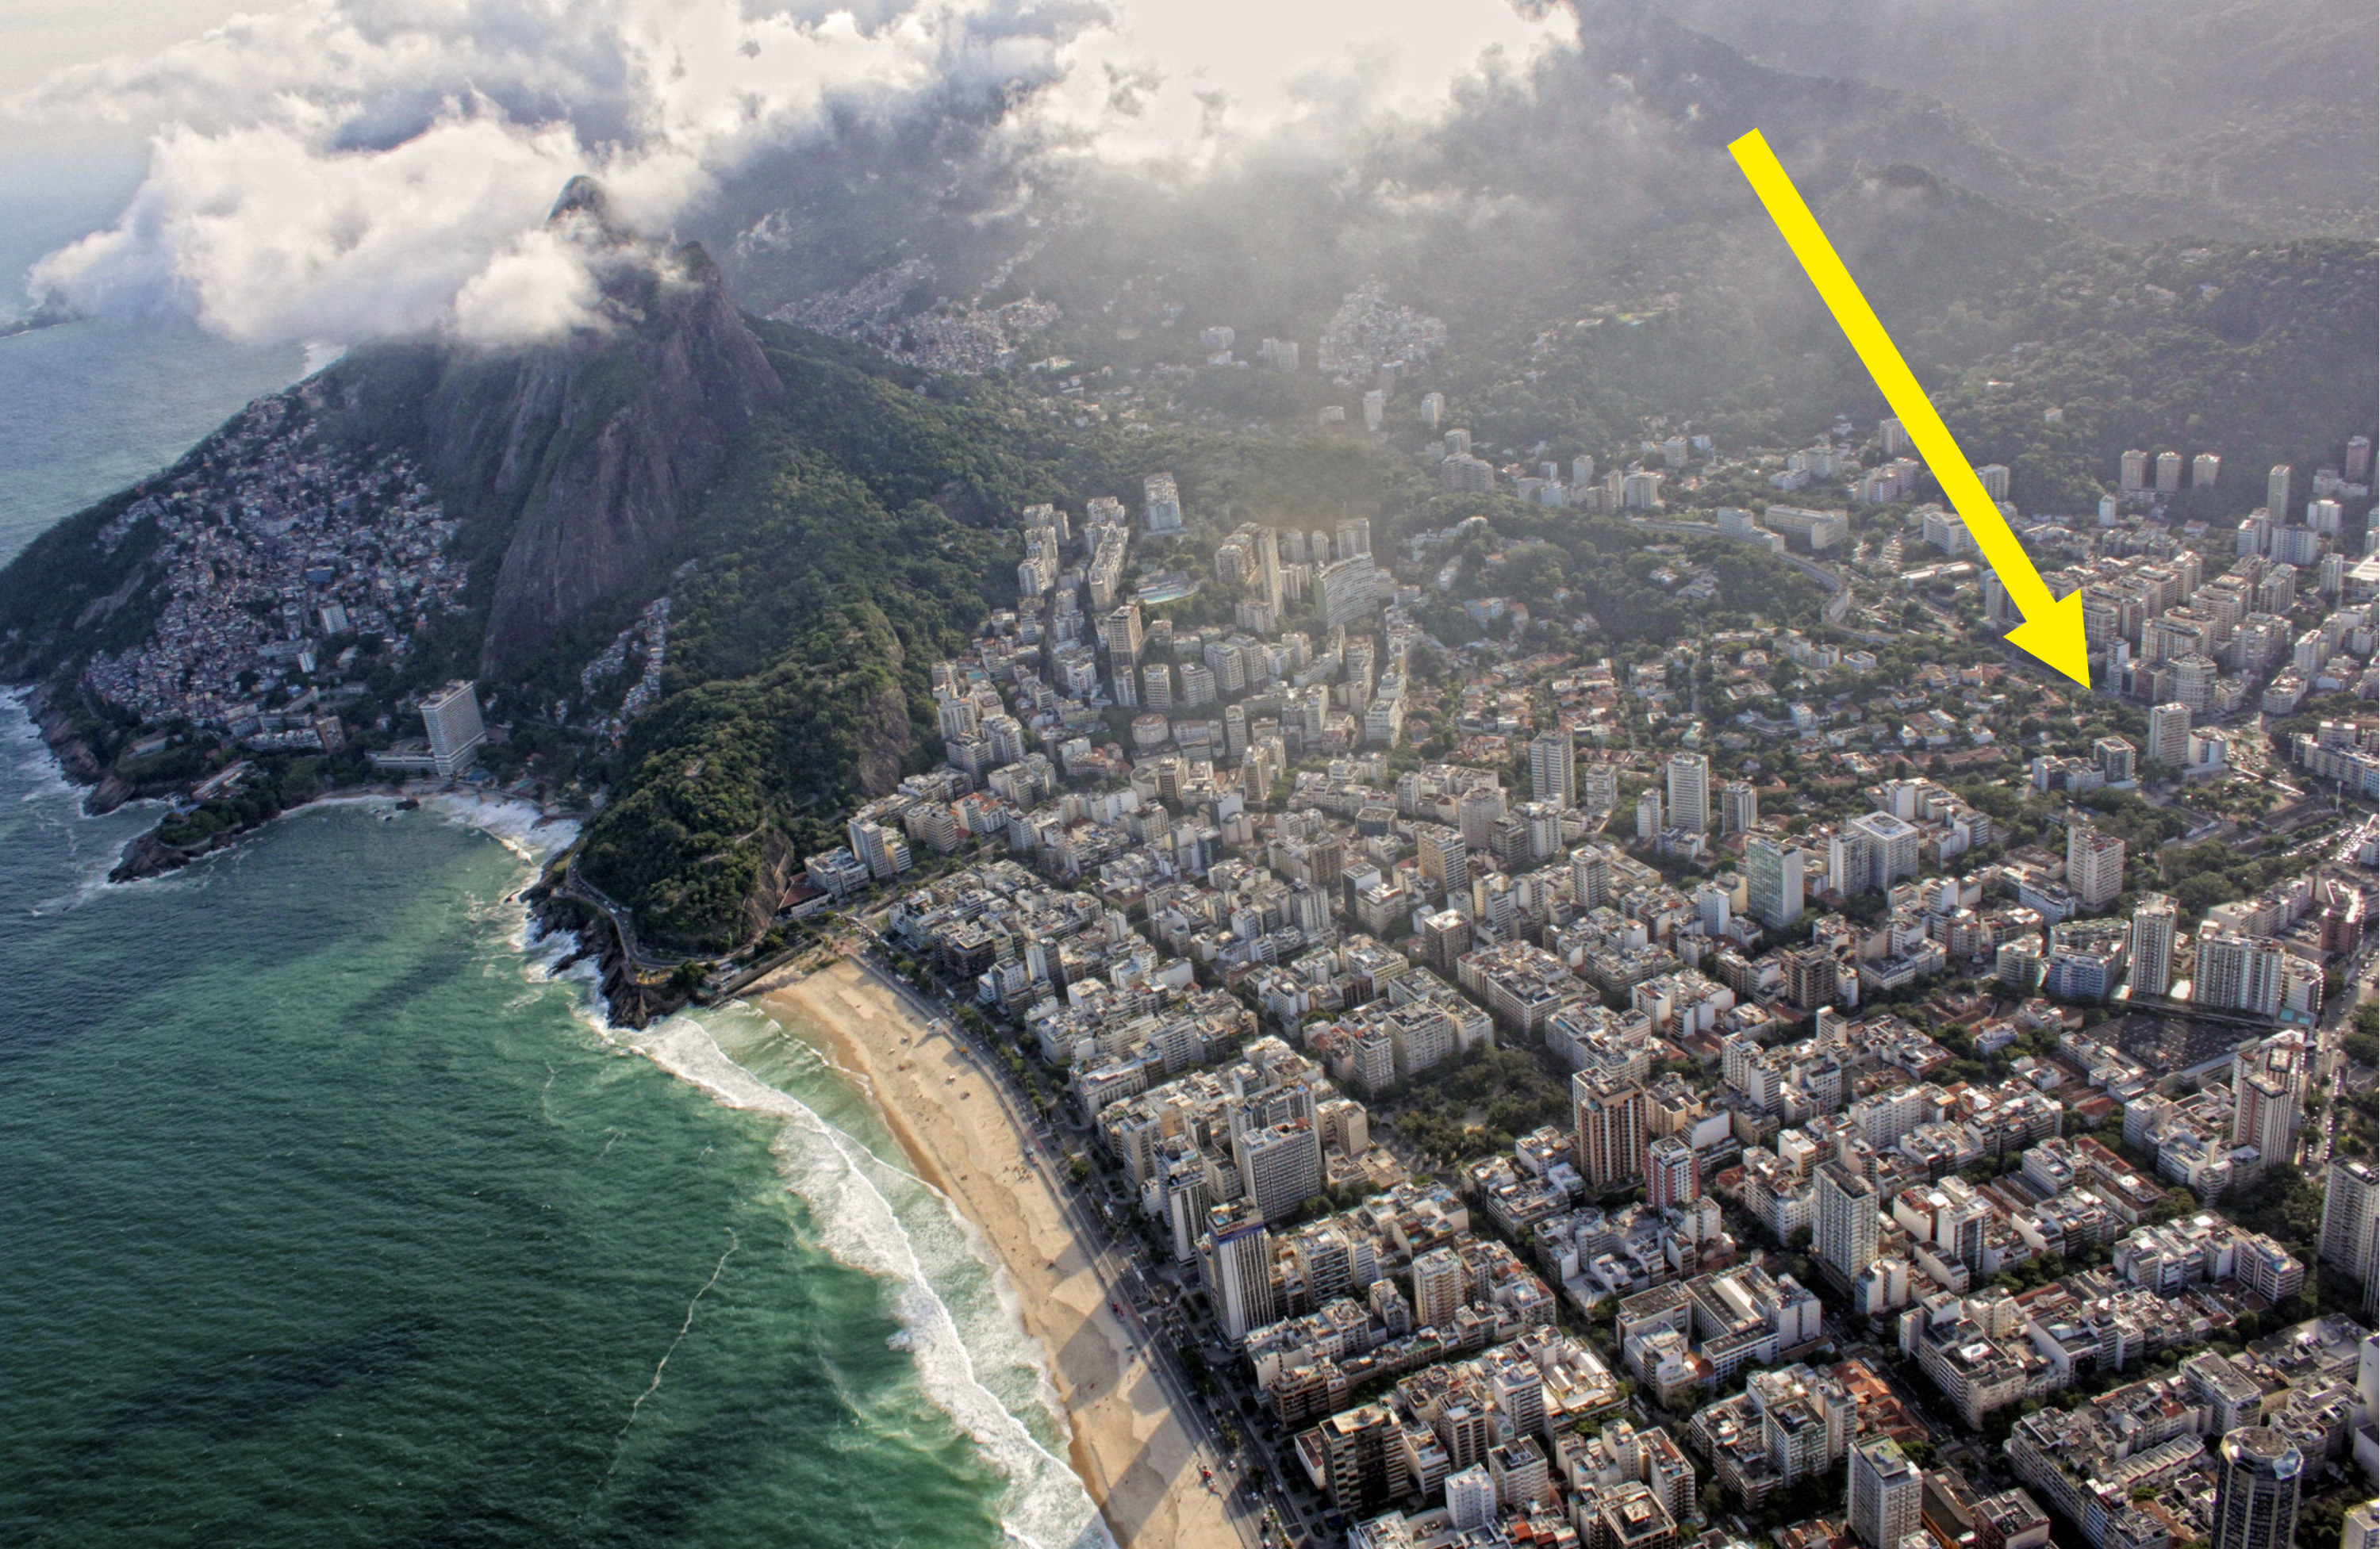 An aerial view of Rio